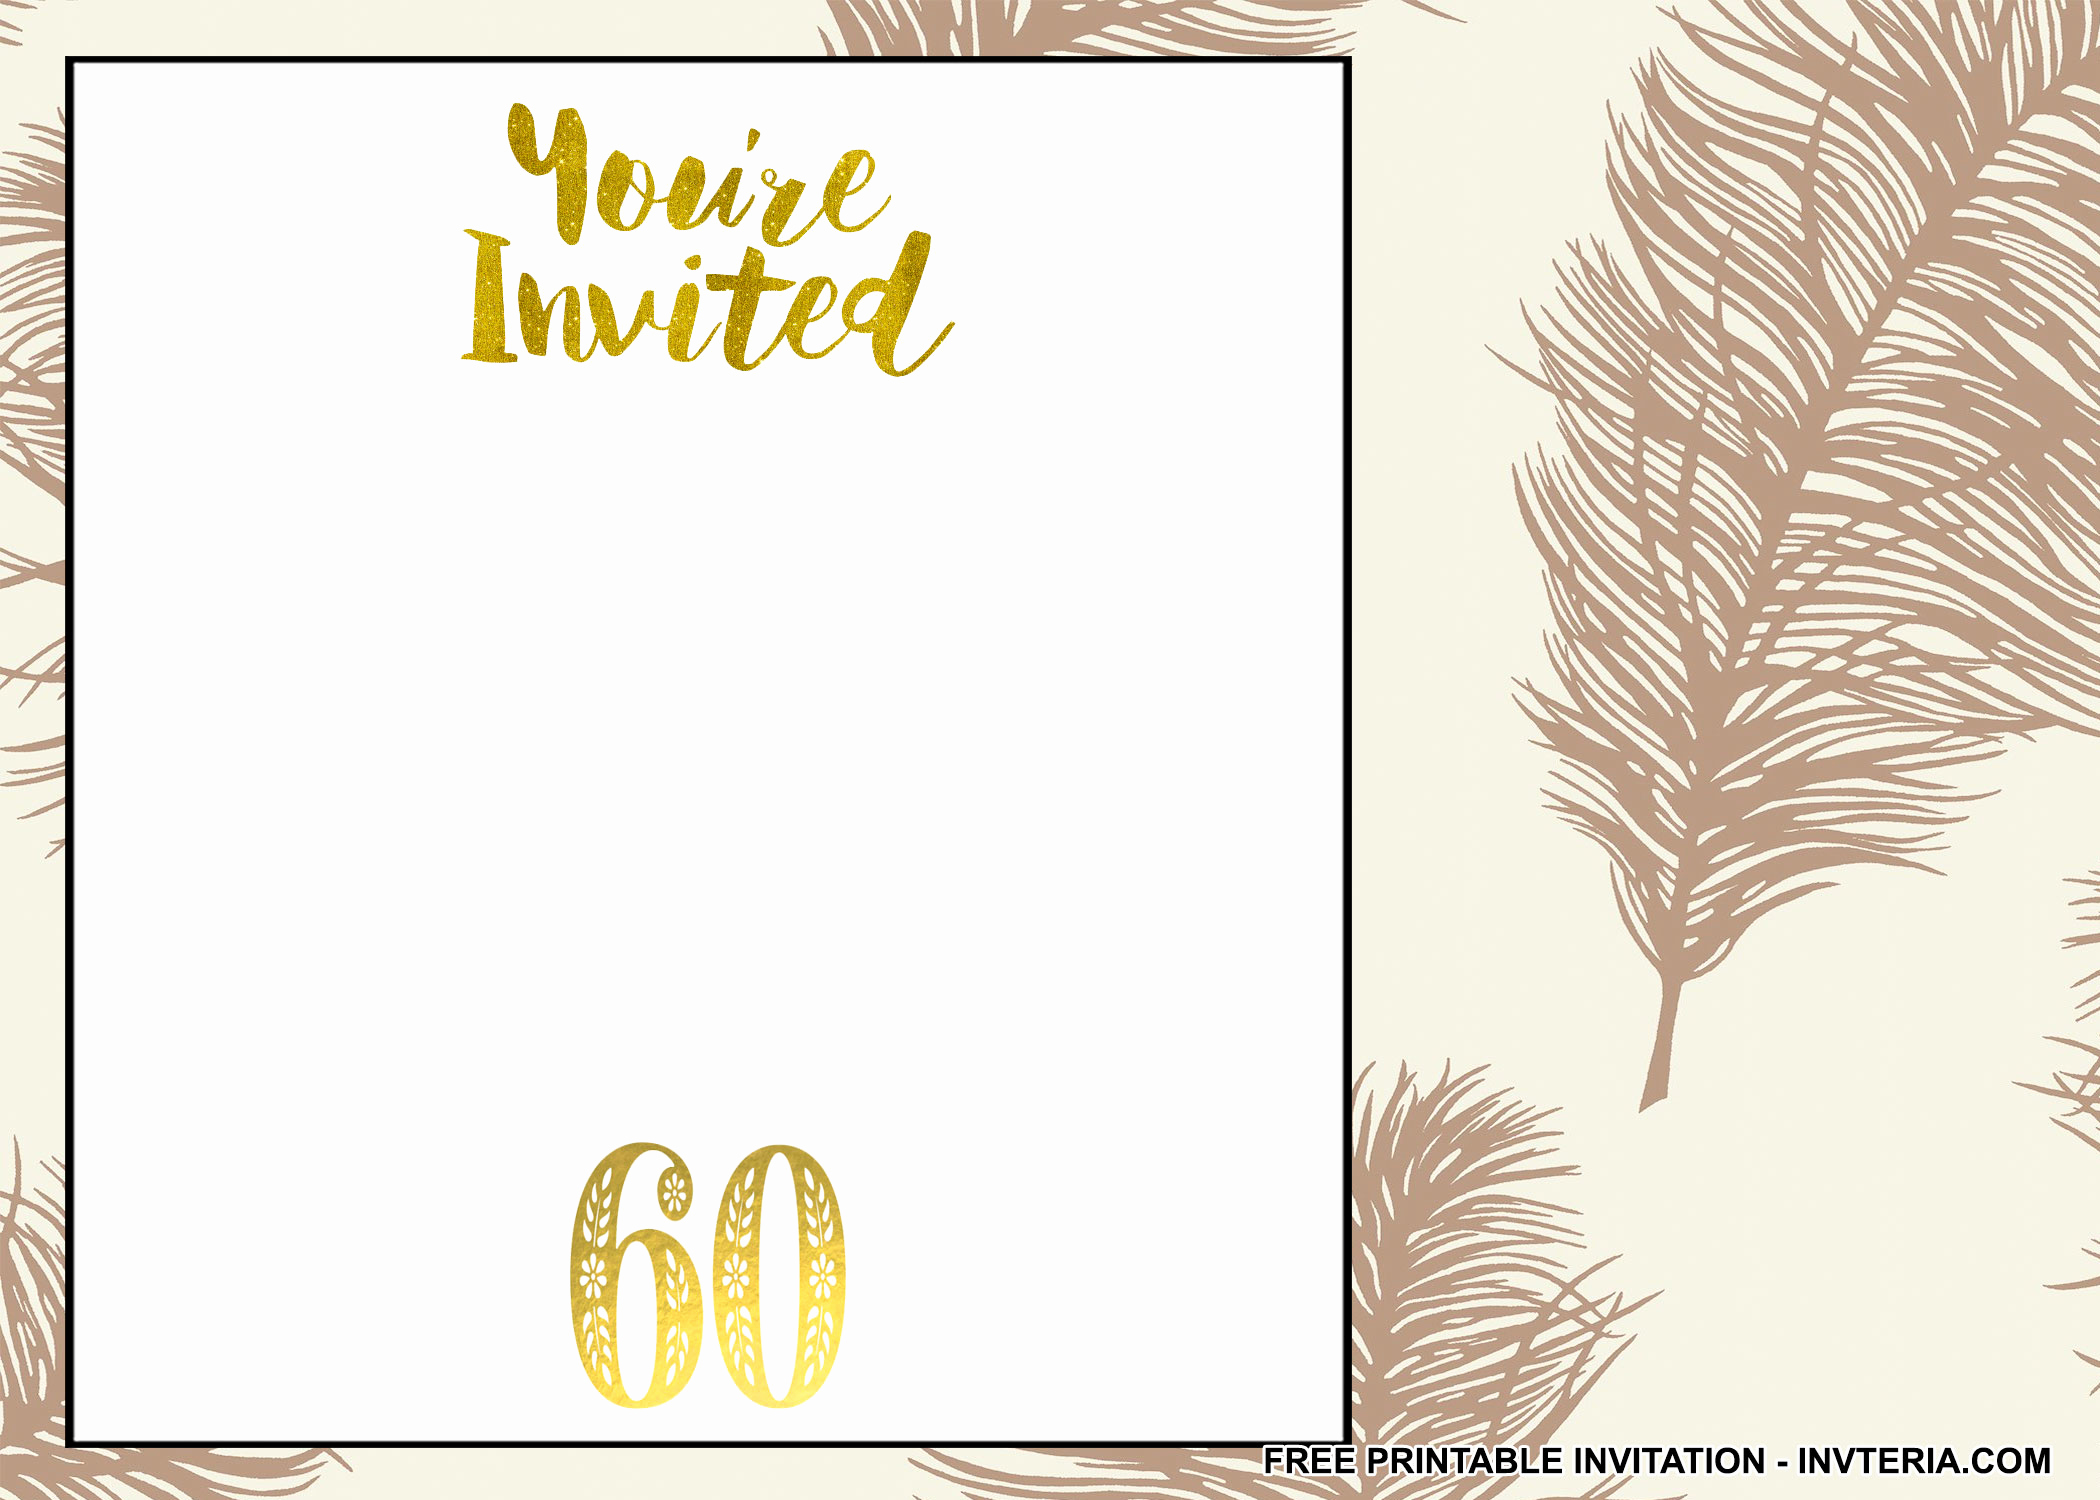 60th Birthday Invite Templates Luxury Others Personalize Your Own 60th Birthday Invitations for